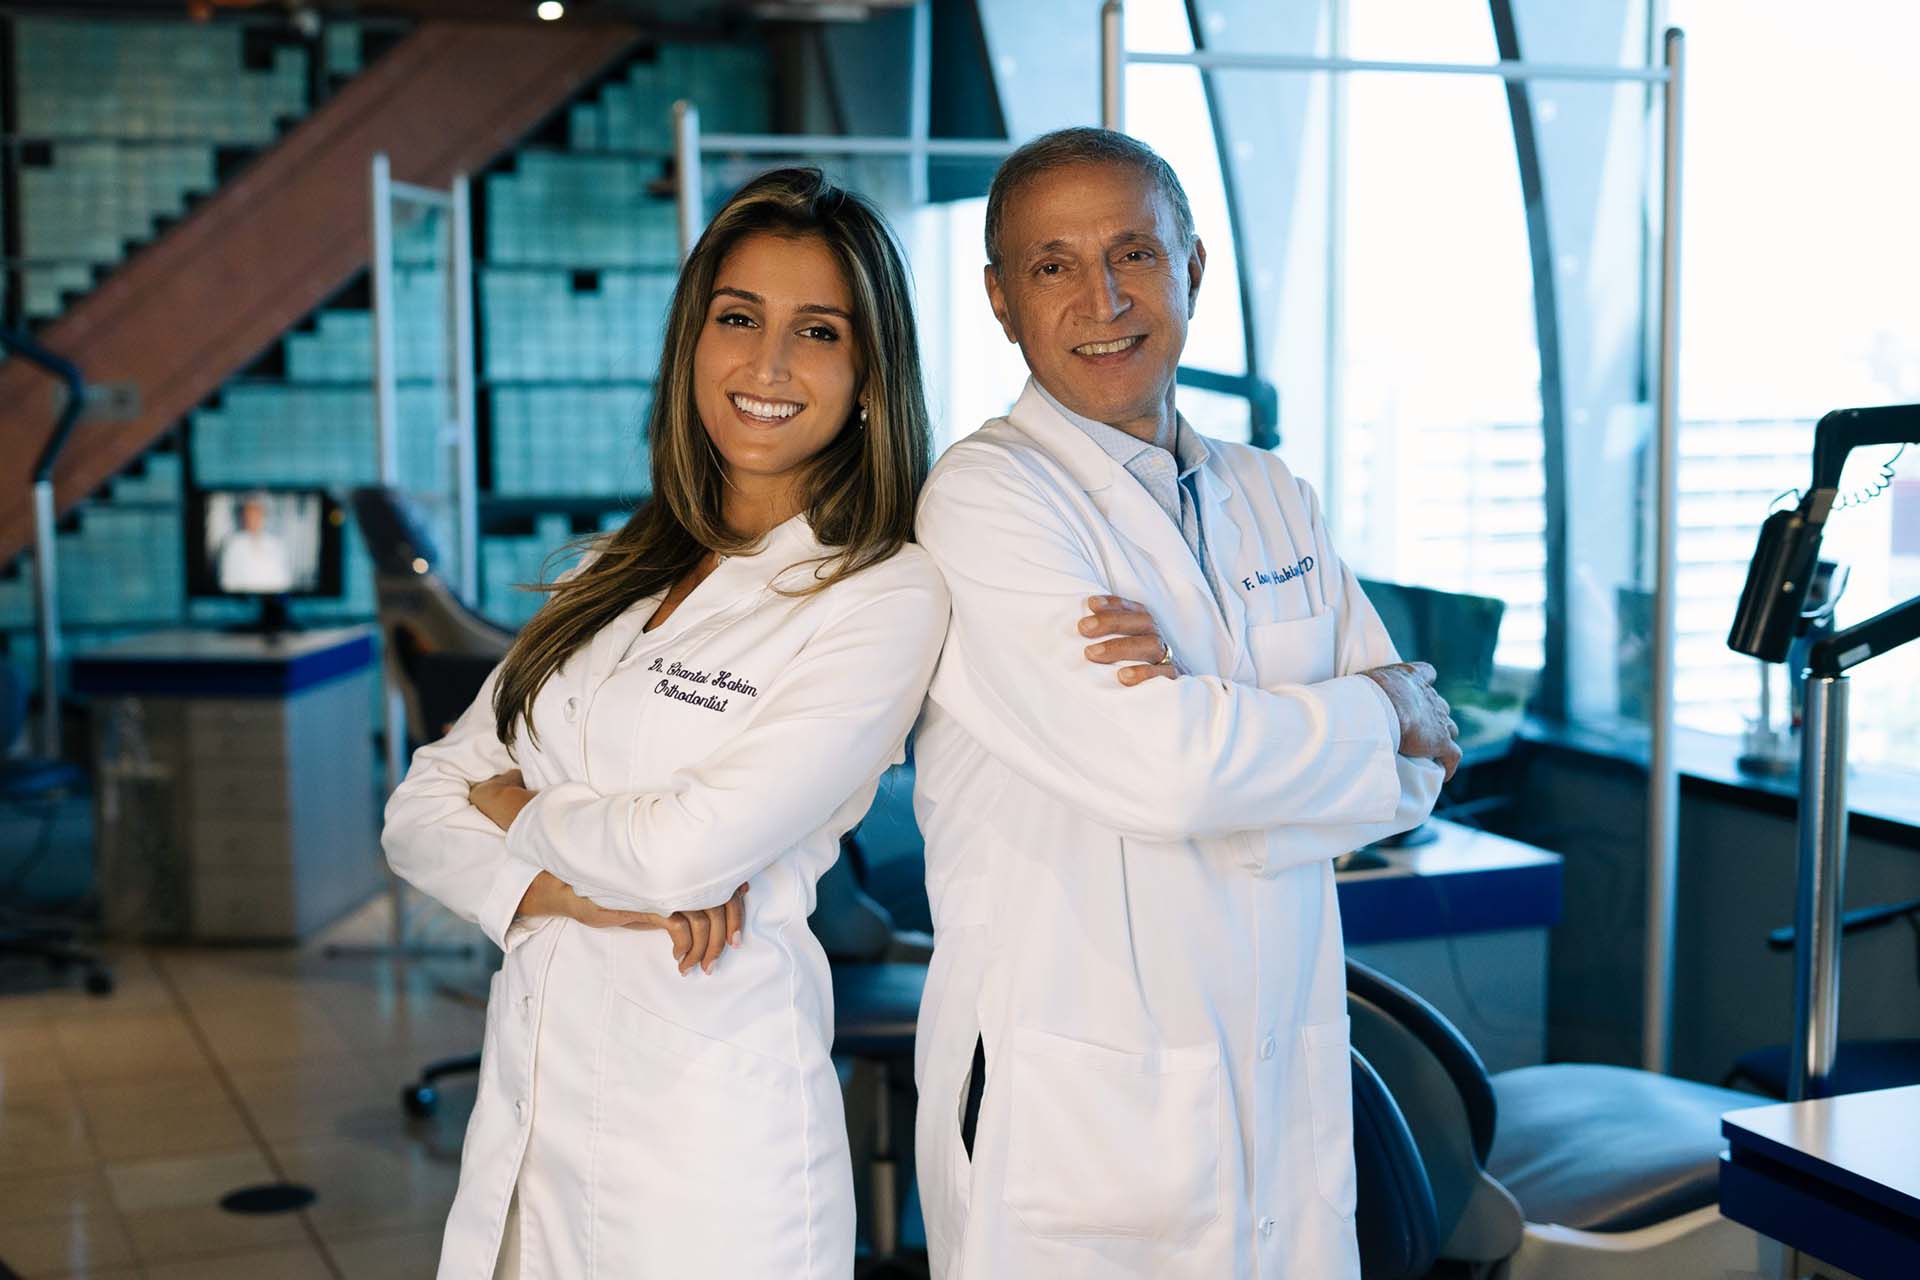 Dr. Chantal Hakim and Dr. F. Isaac Hakim at the Orthospaceship in Los Angeles, a Southern California orthodontic practice serving Brentwood, Los Angeles.